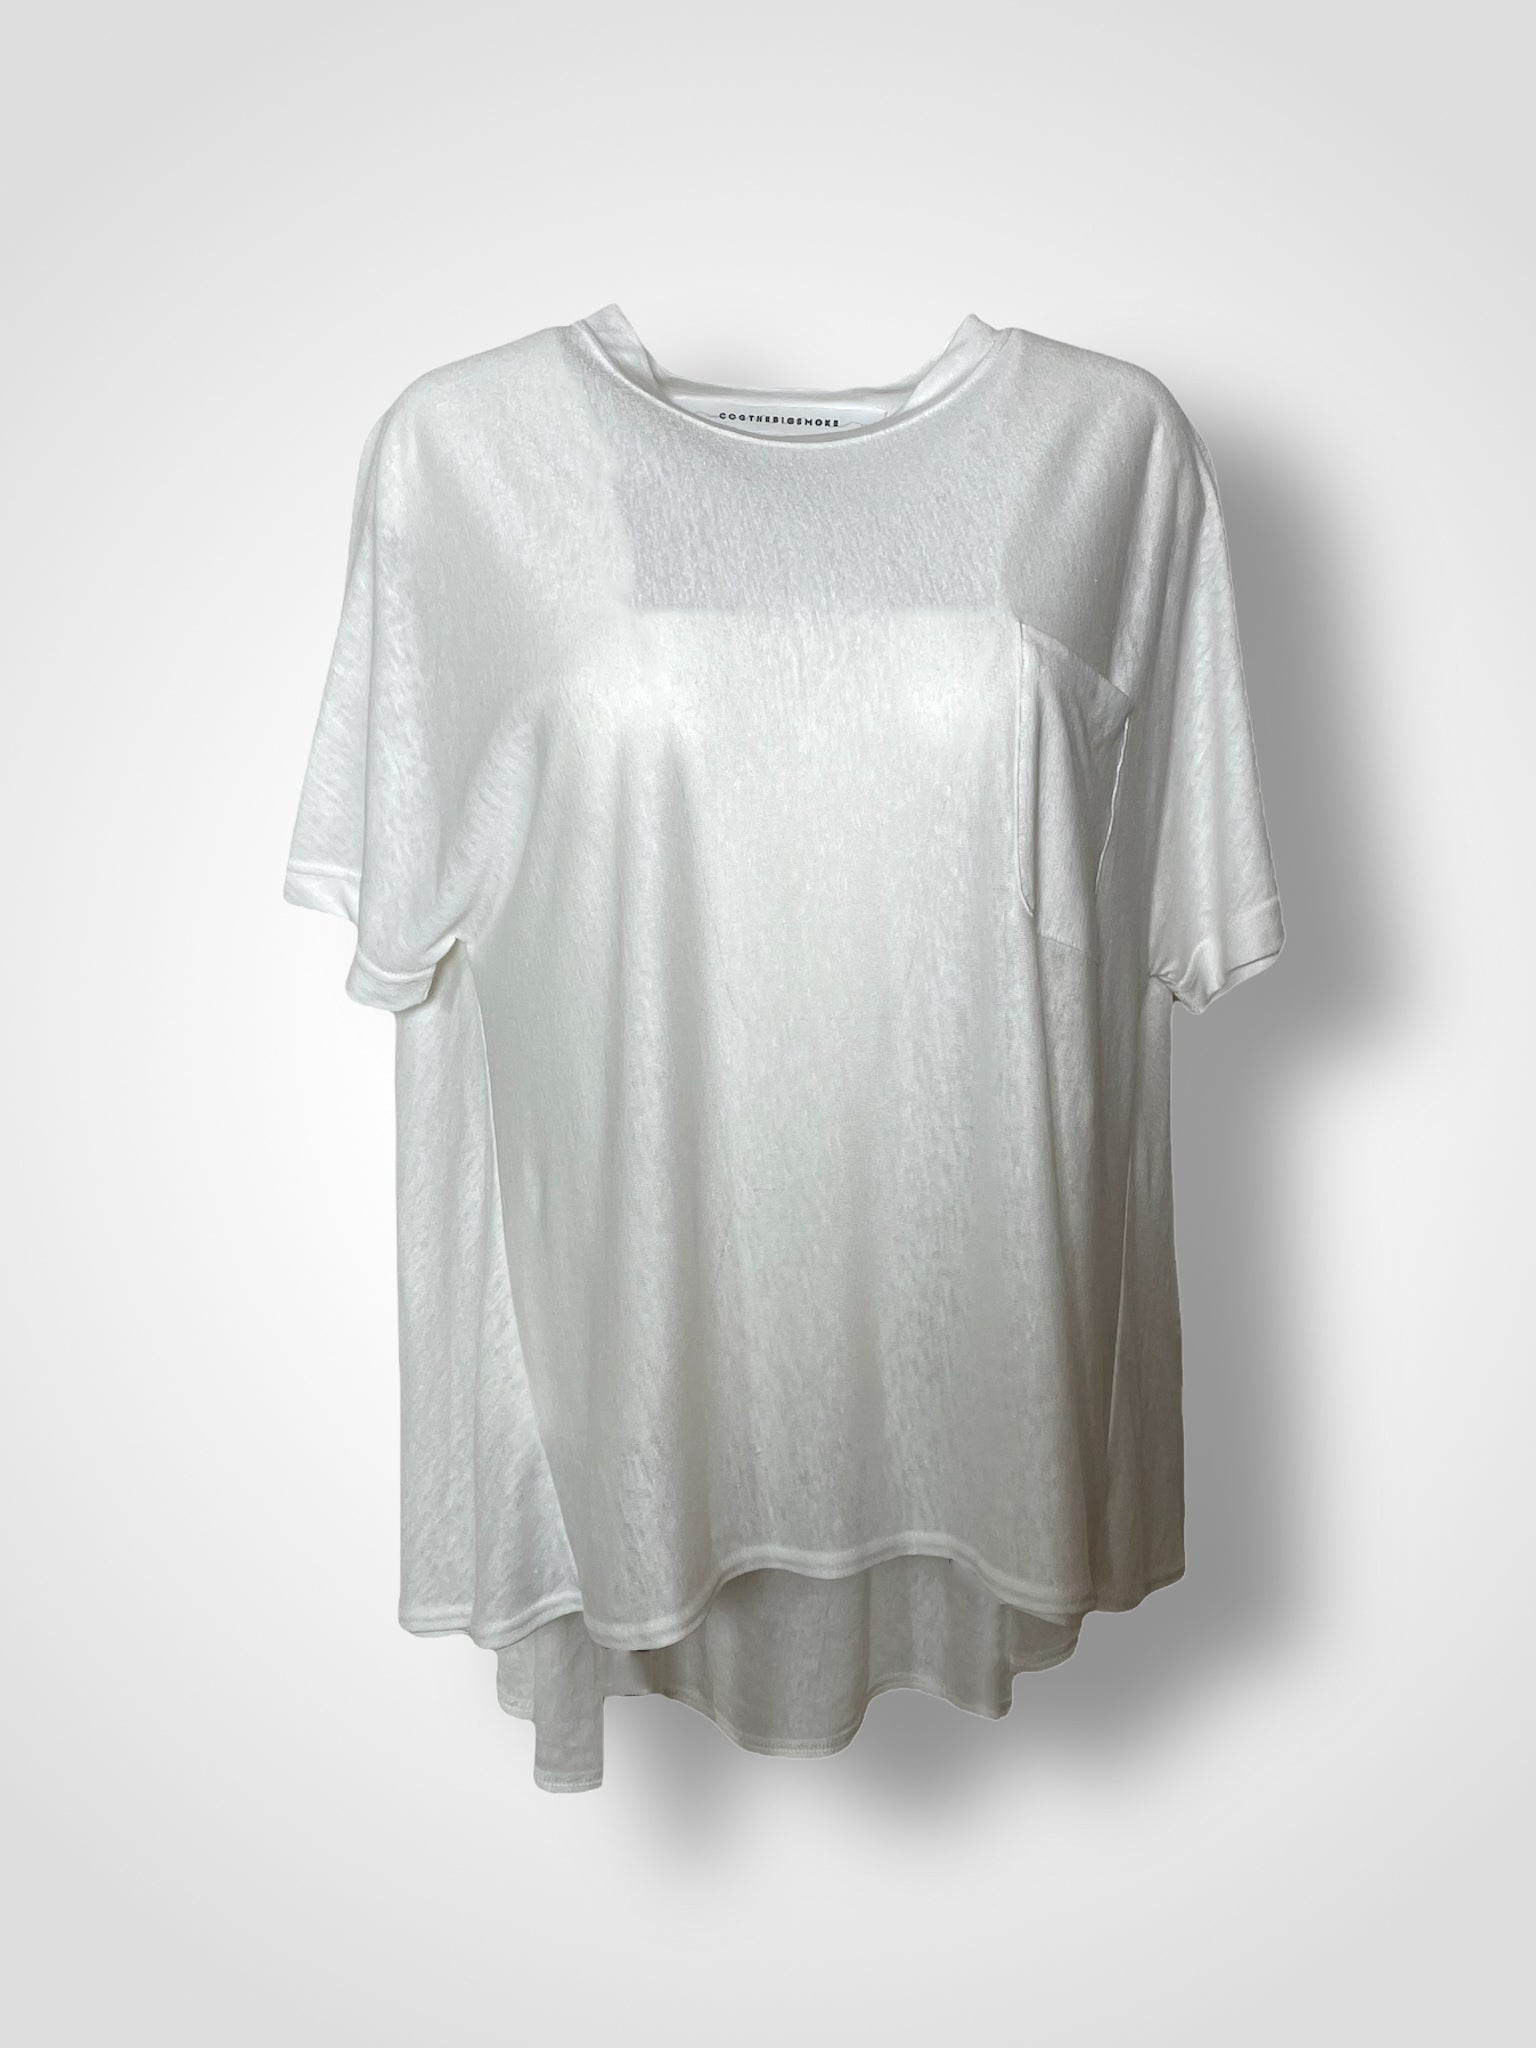 ABIGAIL TOP / IMPERIAL LINEN JERSEY - C8 – COGTHEBIGSMOKE